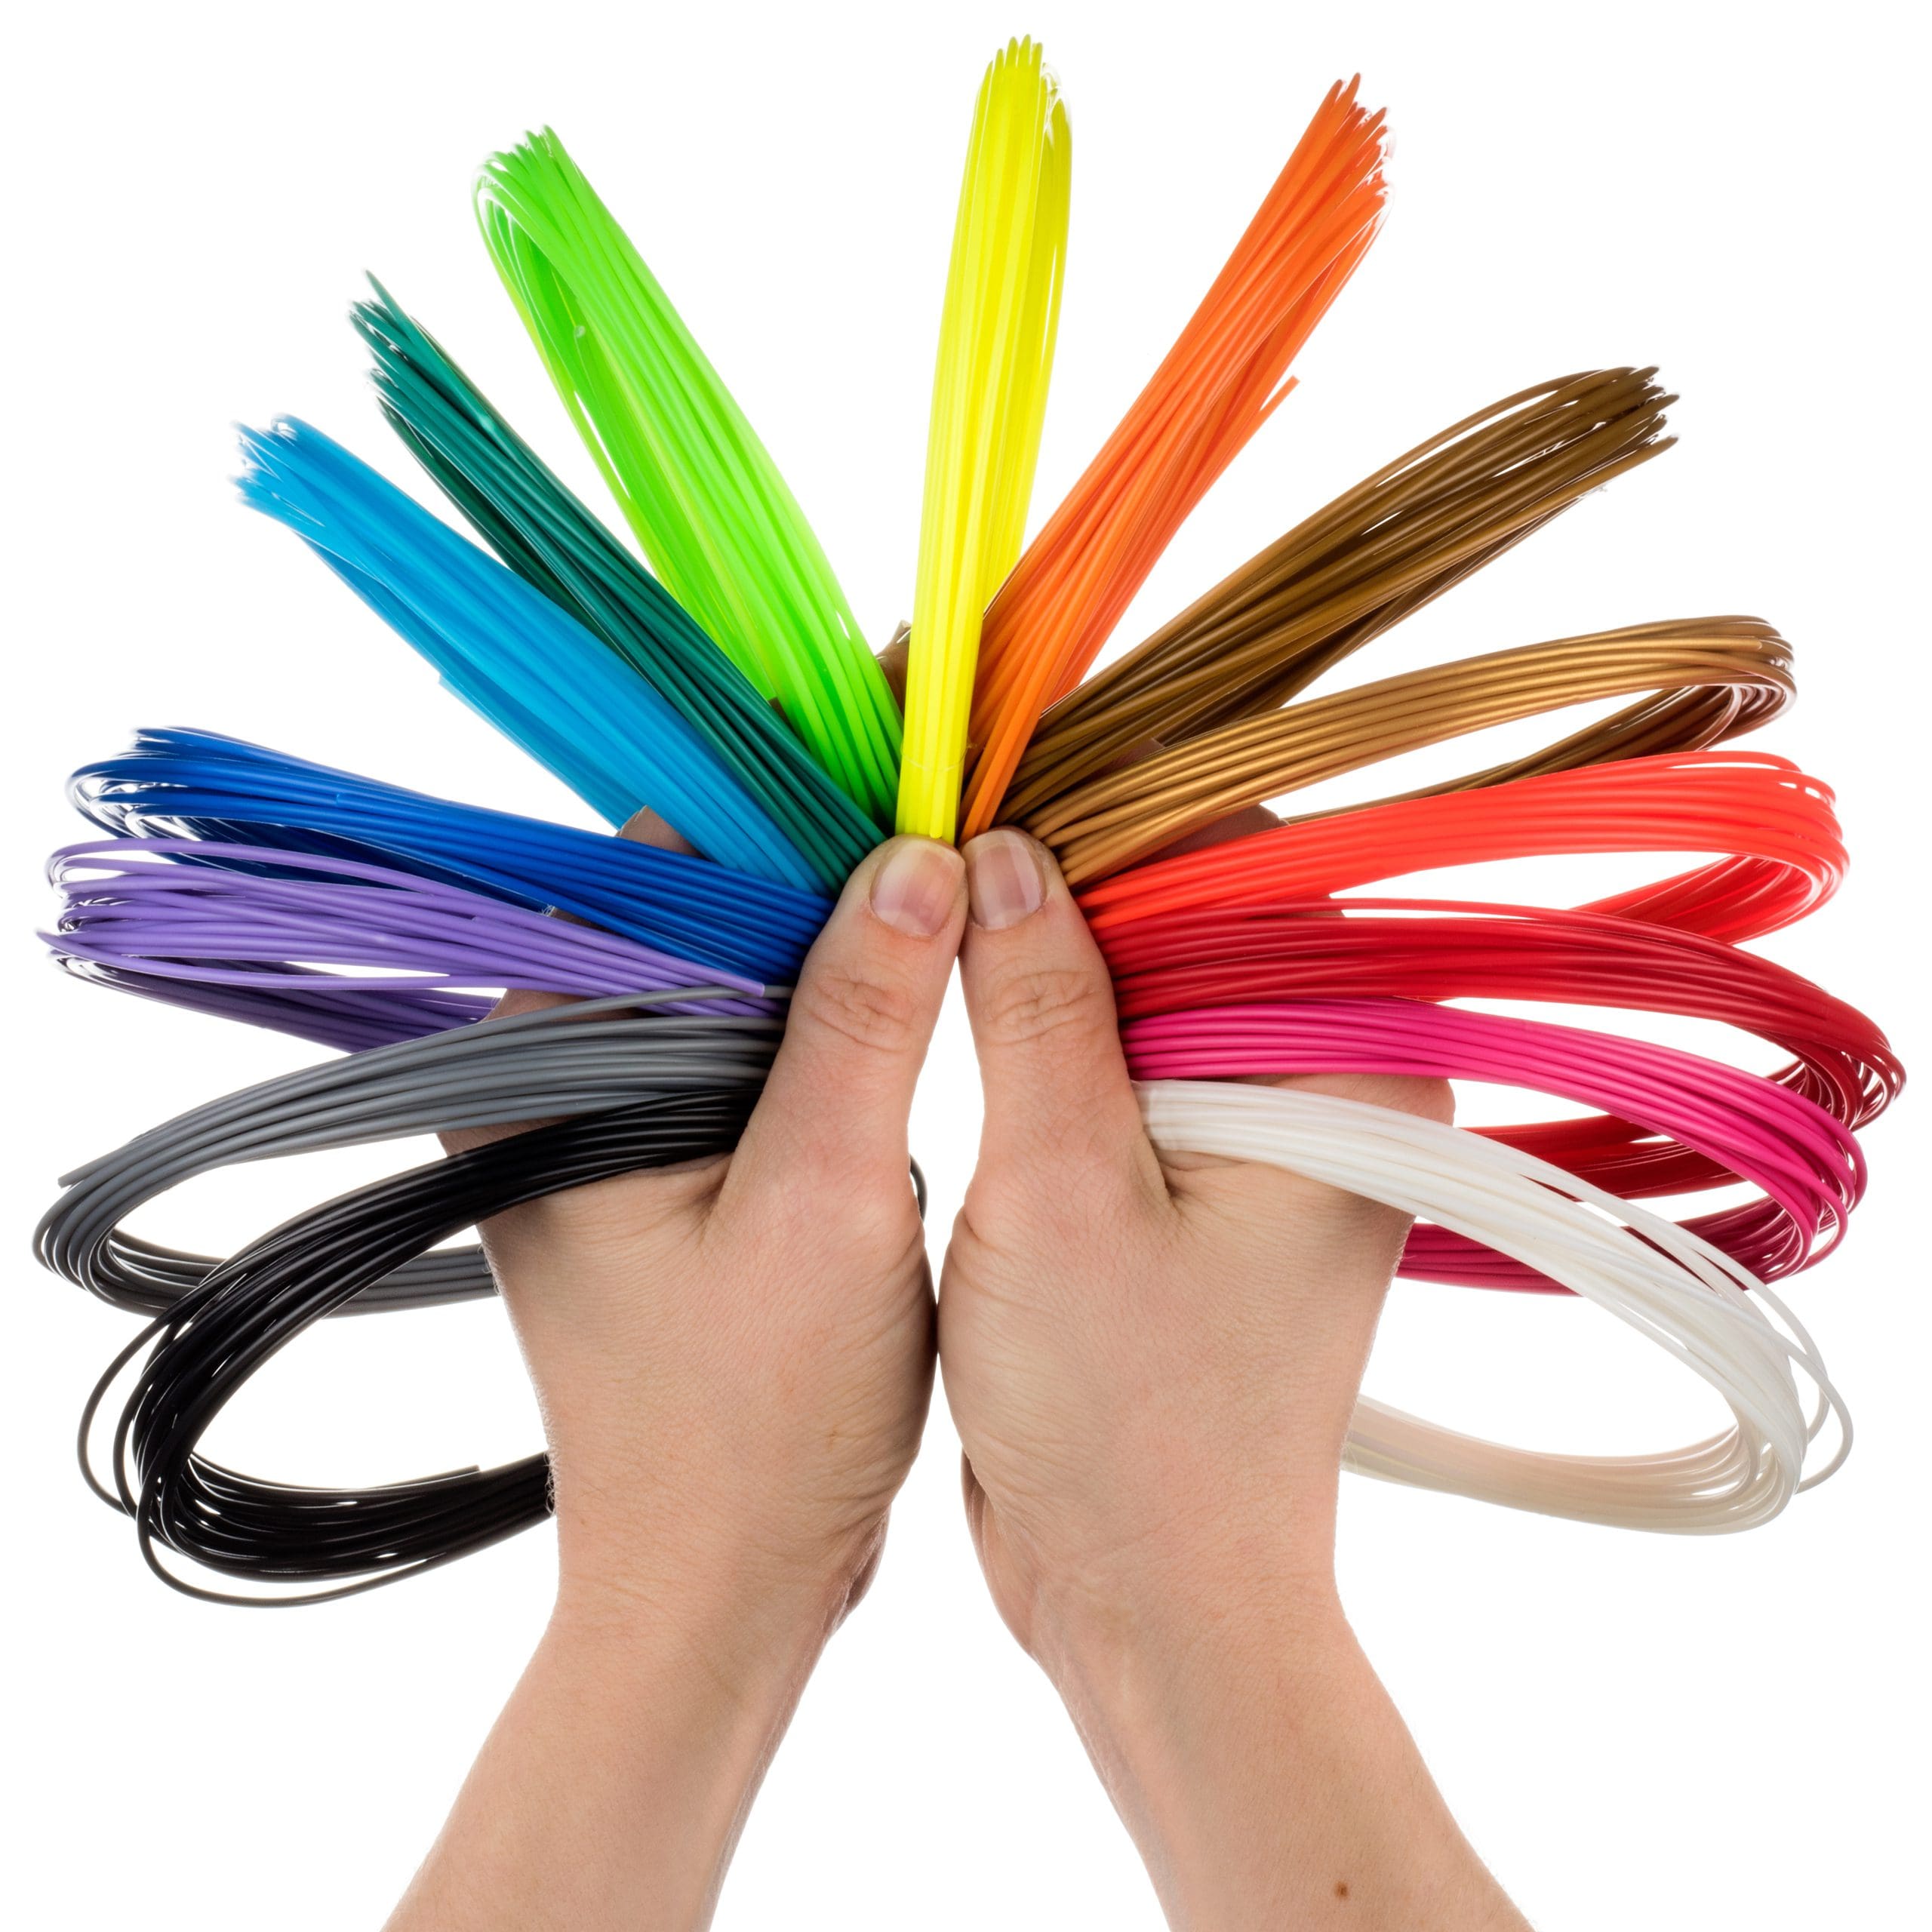 Hand mode product photography pricing example. Professional hand modeling product photo showing two hands holding 3D printer filaments in various colors.